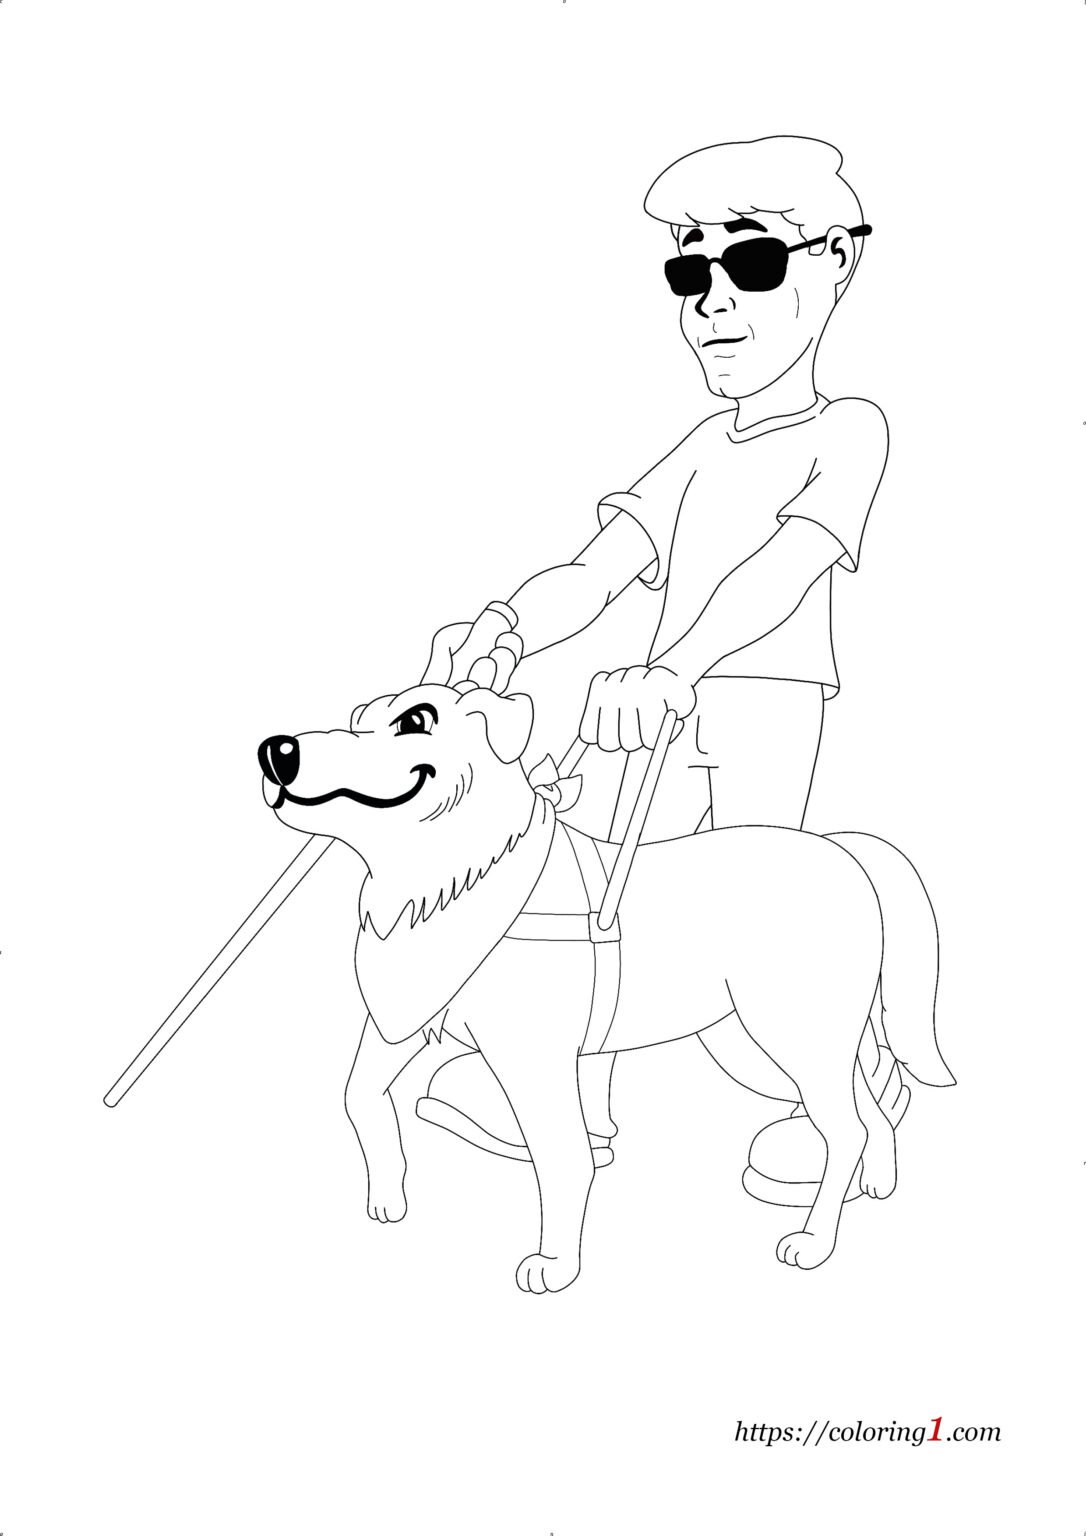 Service Dog Coloring Pages 2 Free Coloring Sheets (2021)